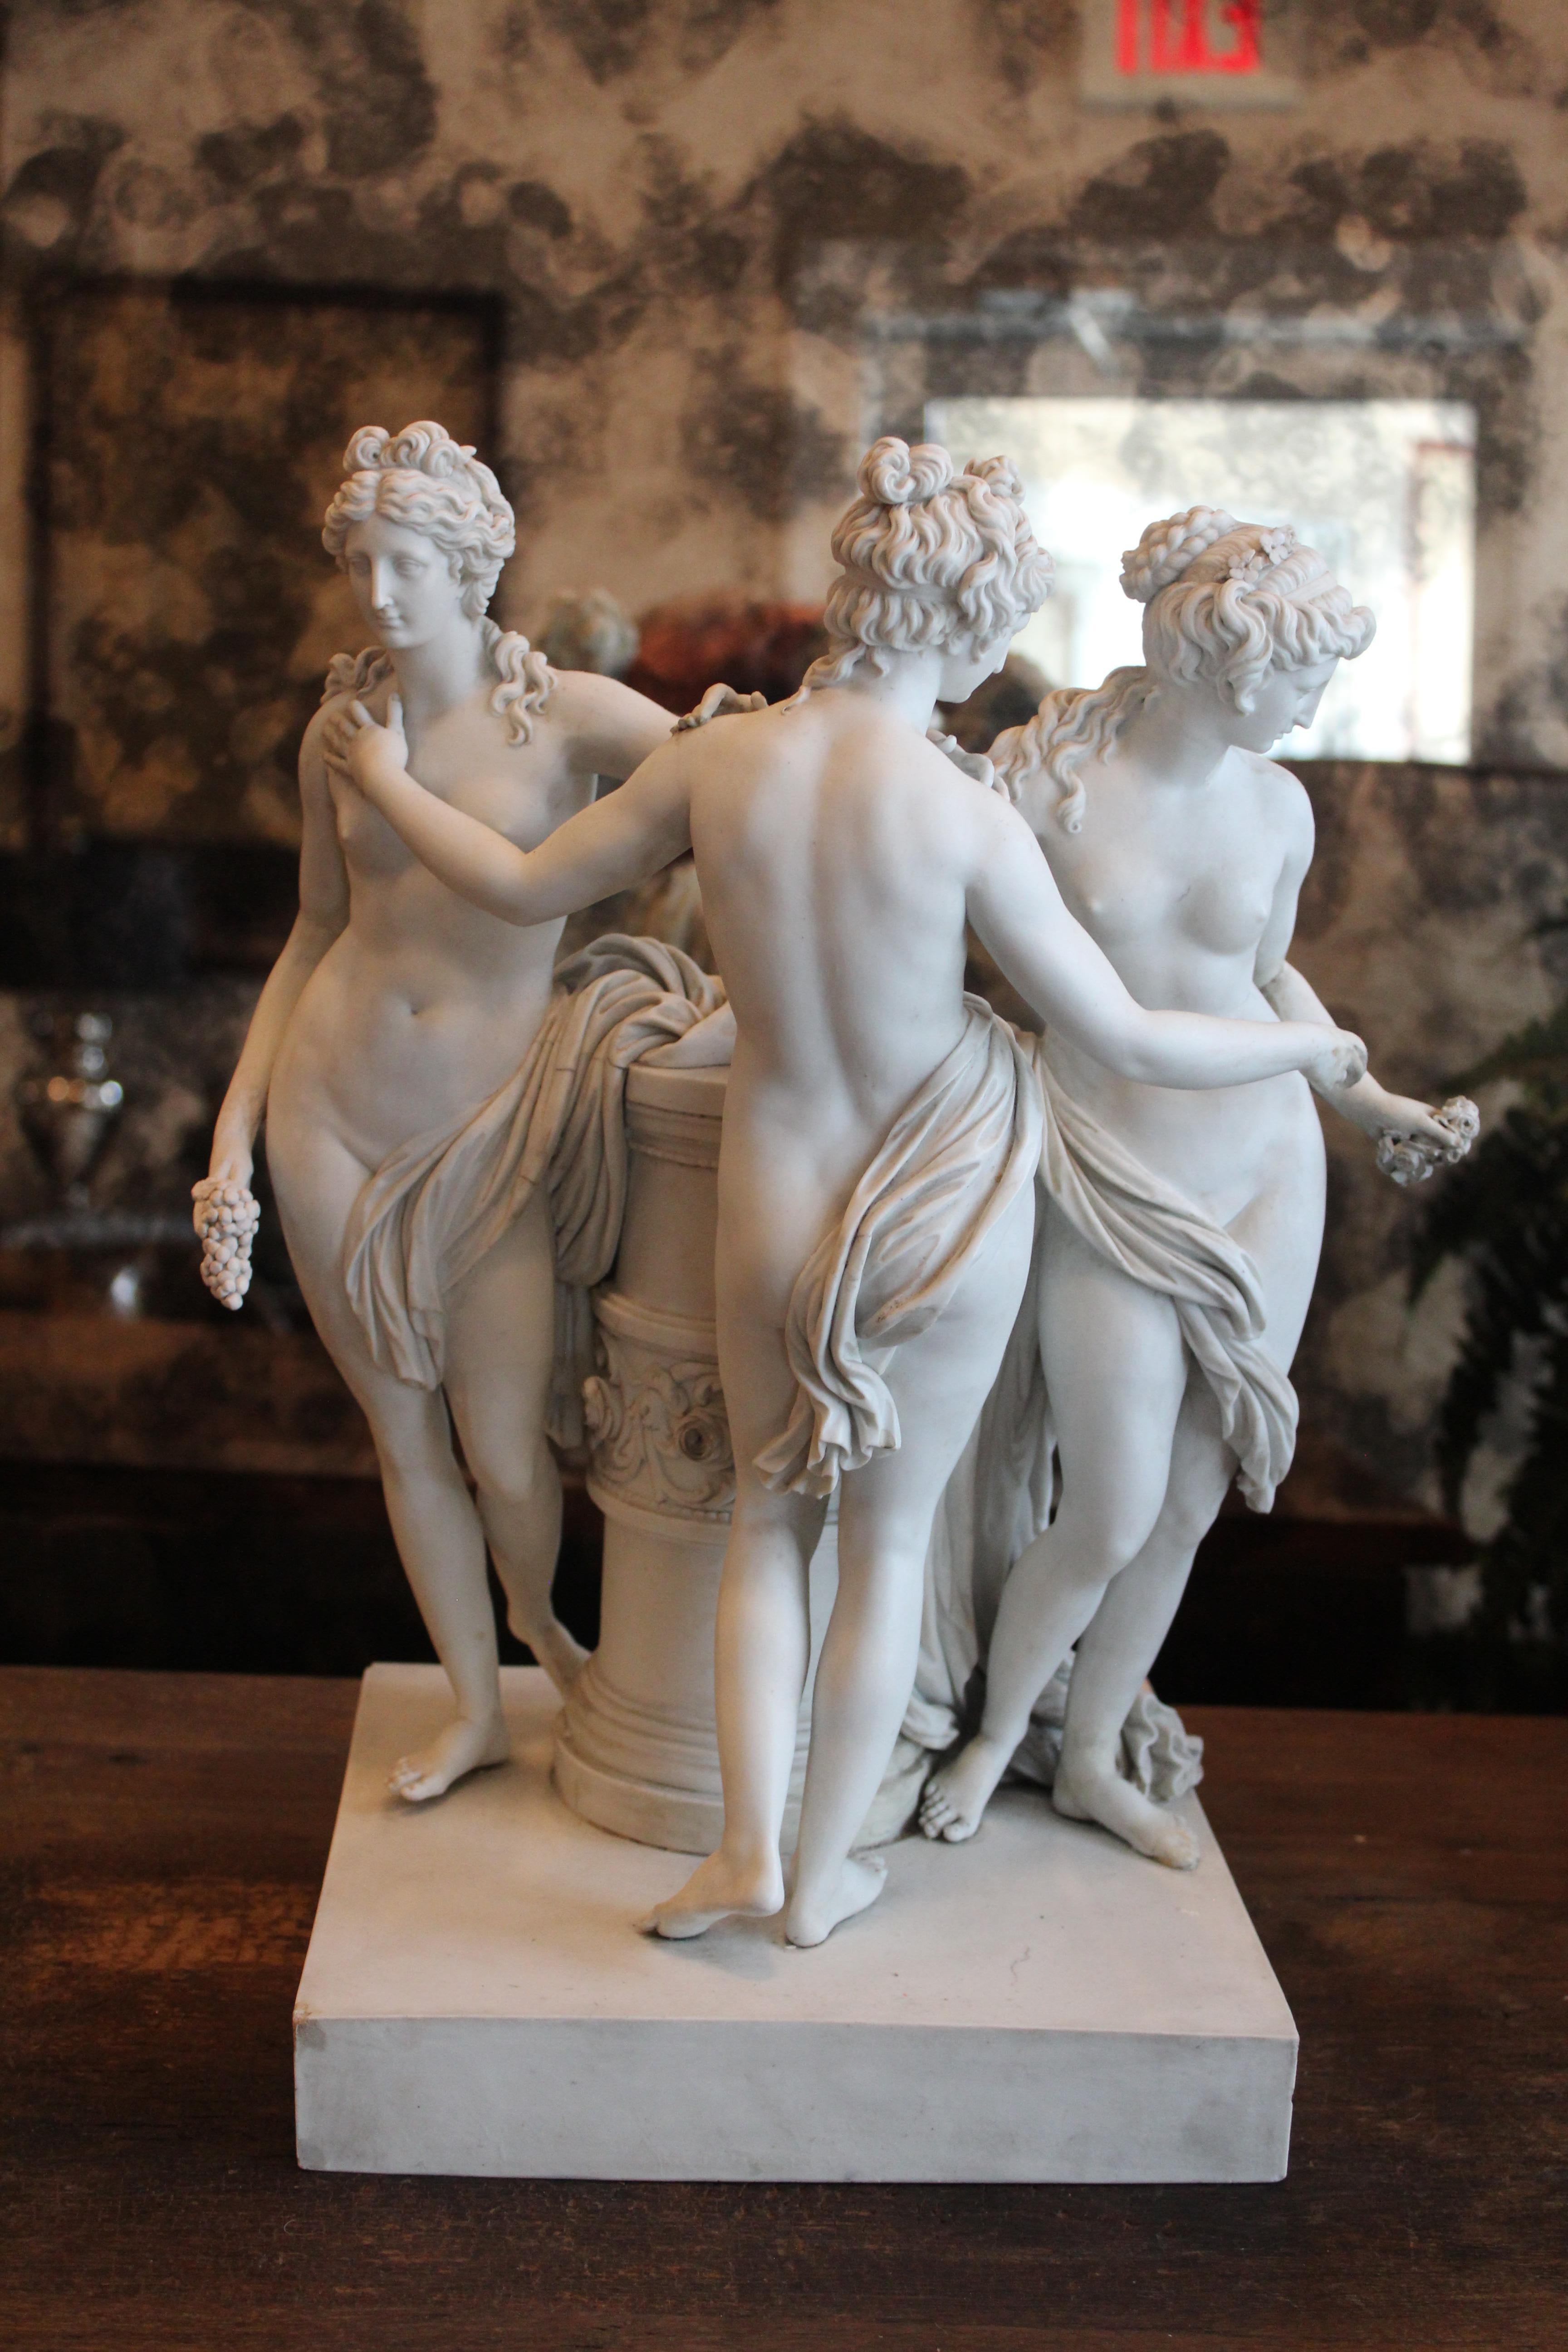 Three Graces porcelain by Meissen 

The group depicts the Three Graces from classical Greek mythology, Aglaea, Euphrosne and Thalia, who represent charm, beauty and joy and who were the companions of Aphrodite, Apollo and Athena. The composition